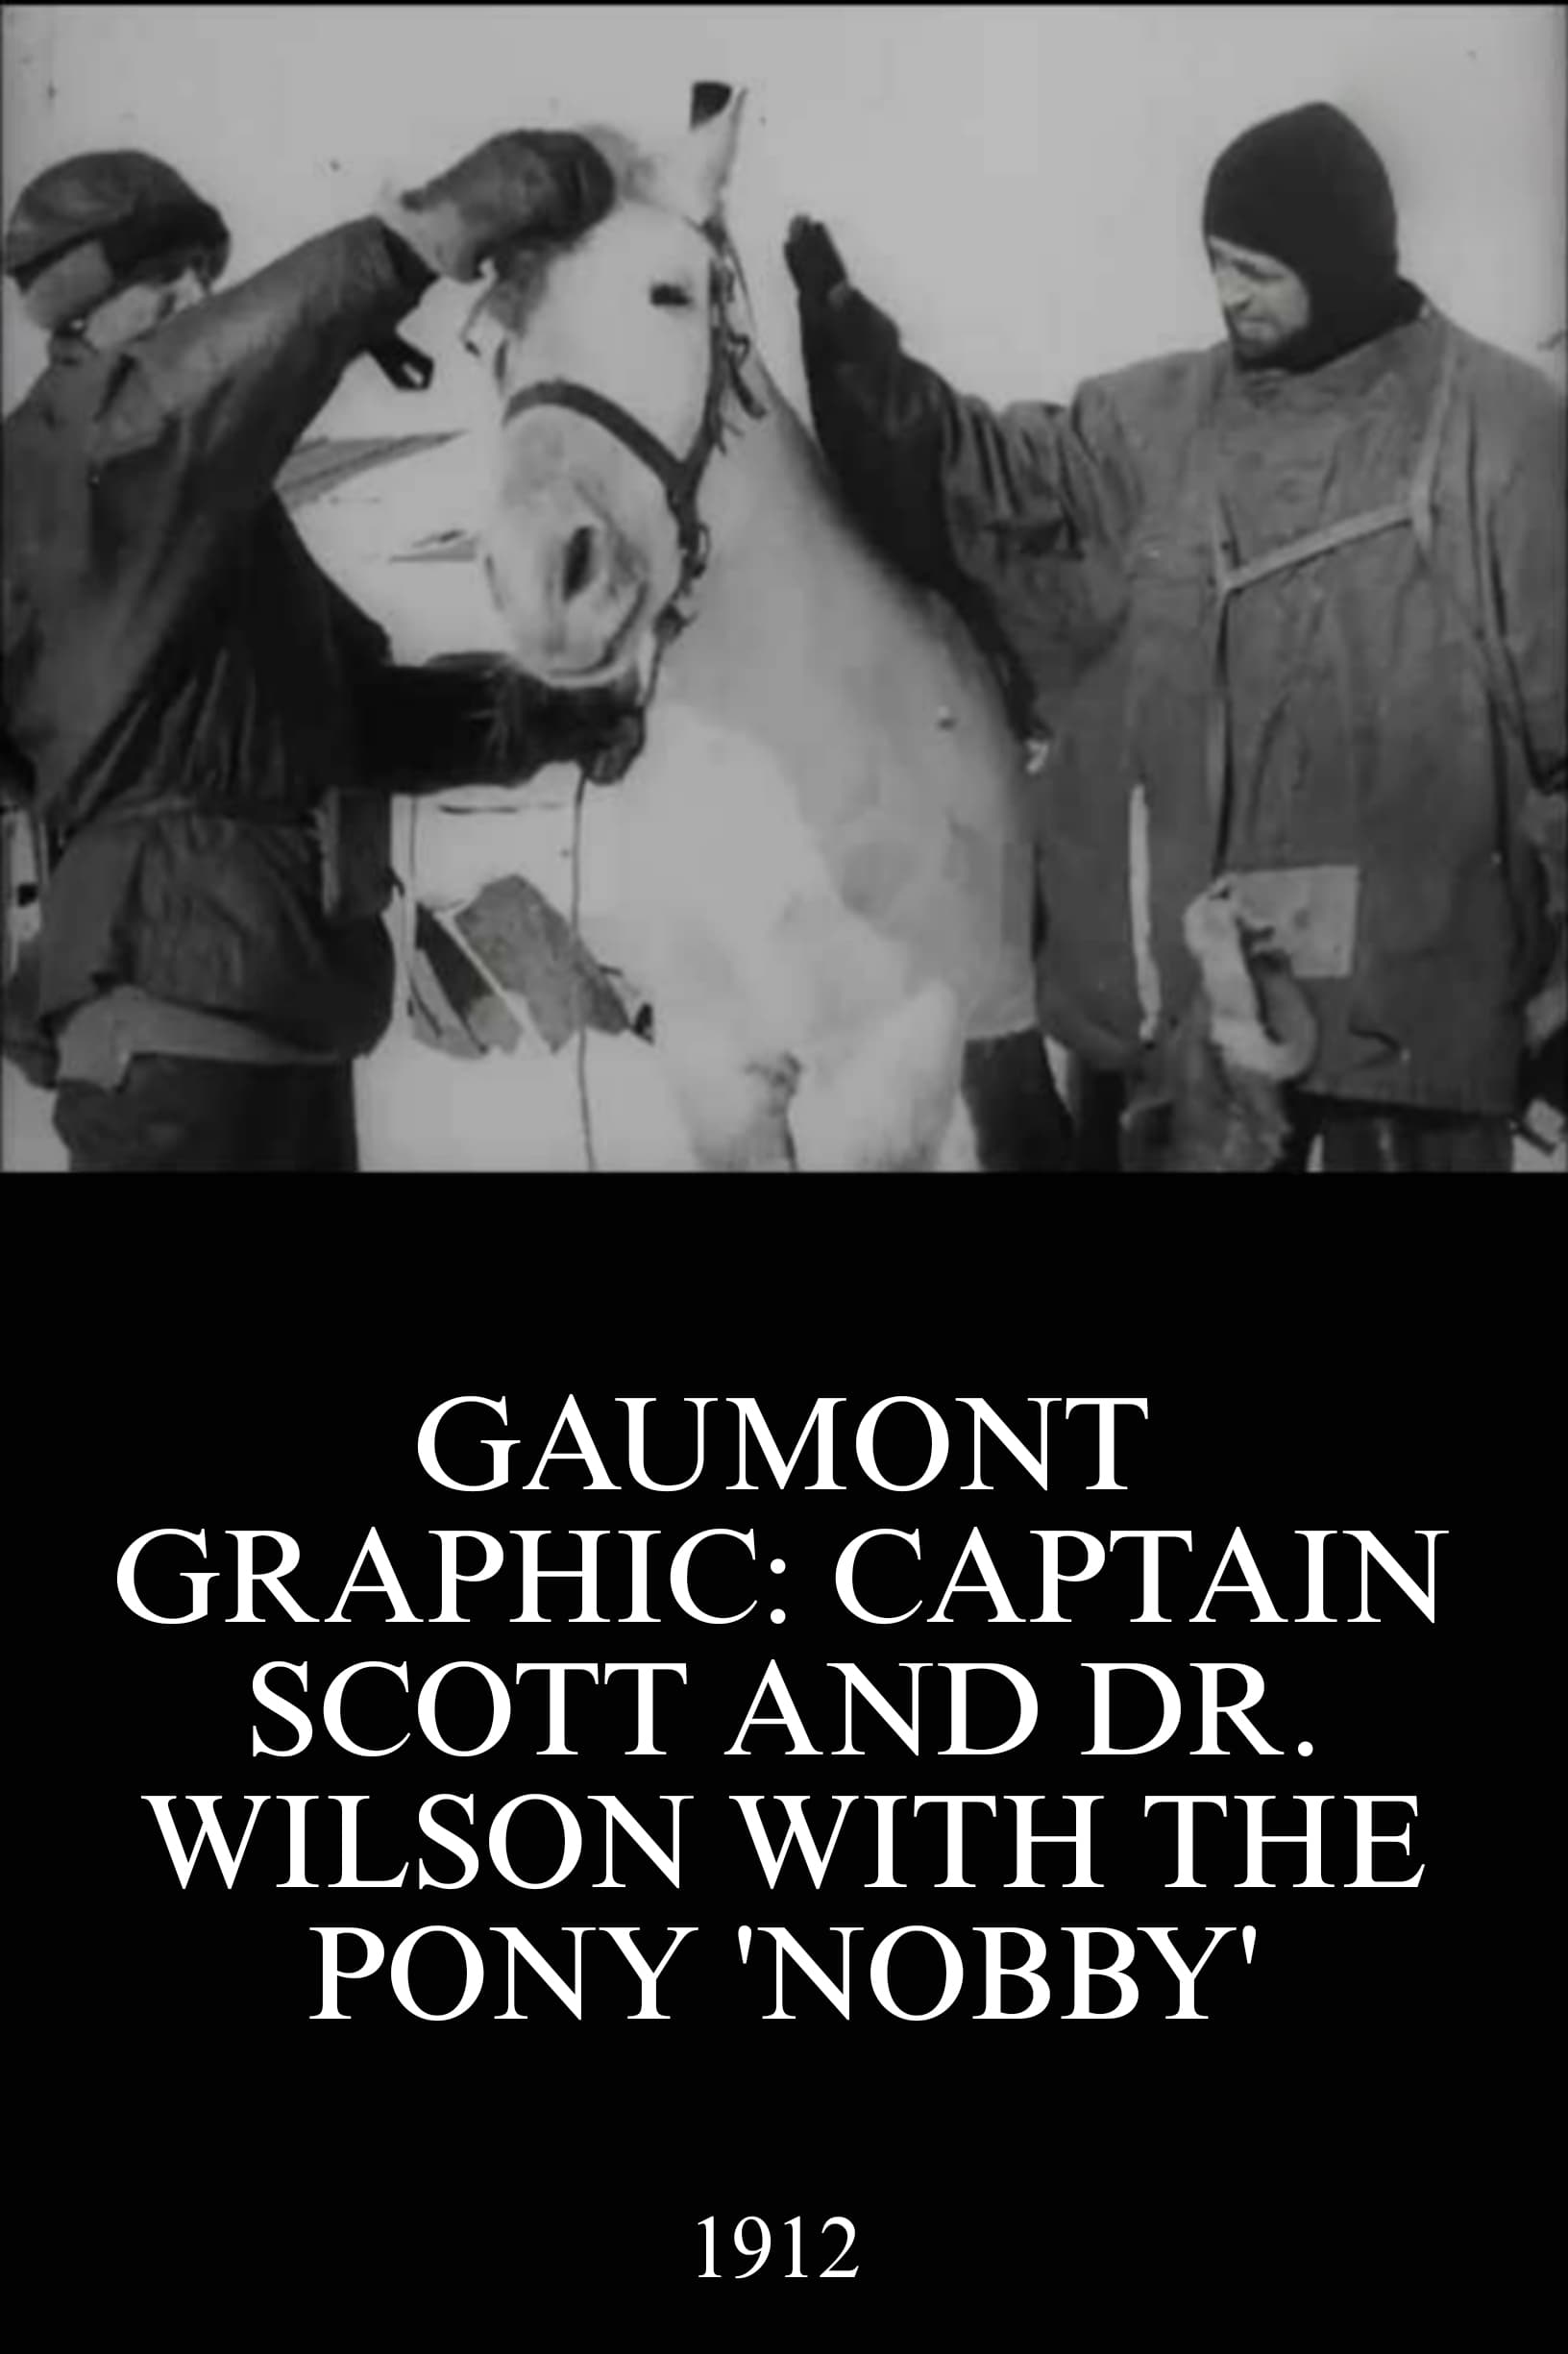 Gaumont Graphic: Captain Scott and Dr. Wilson with the Pony 'Nobby'